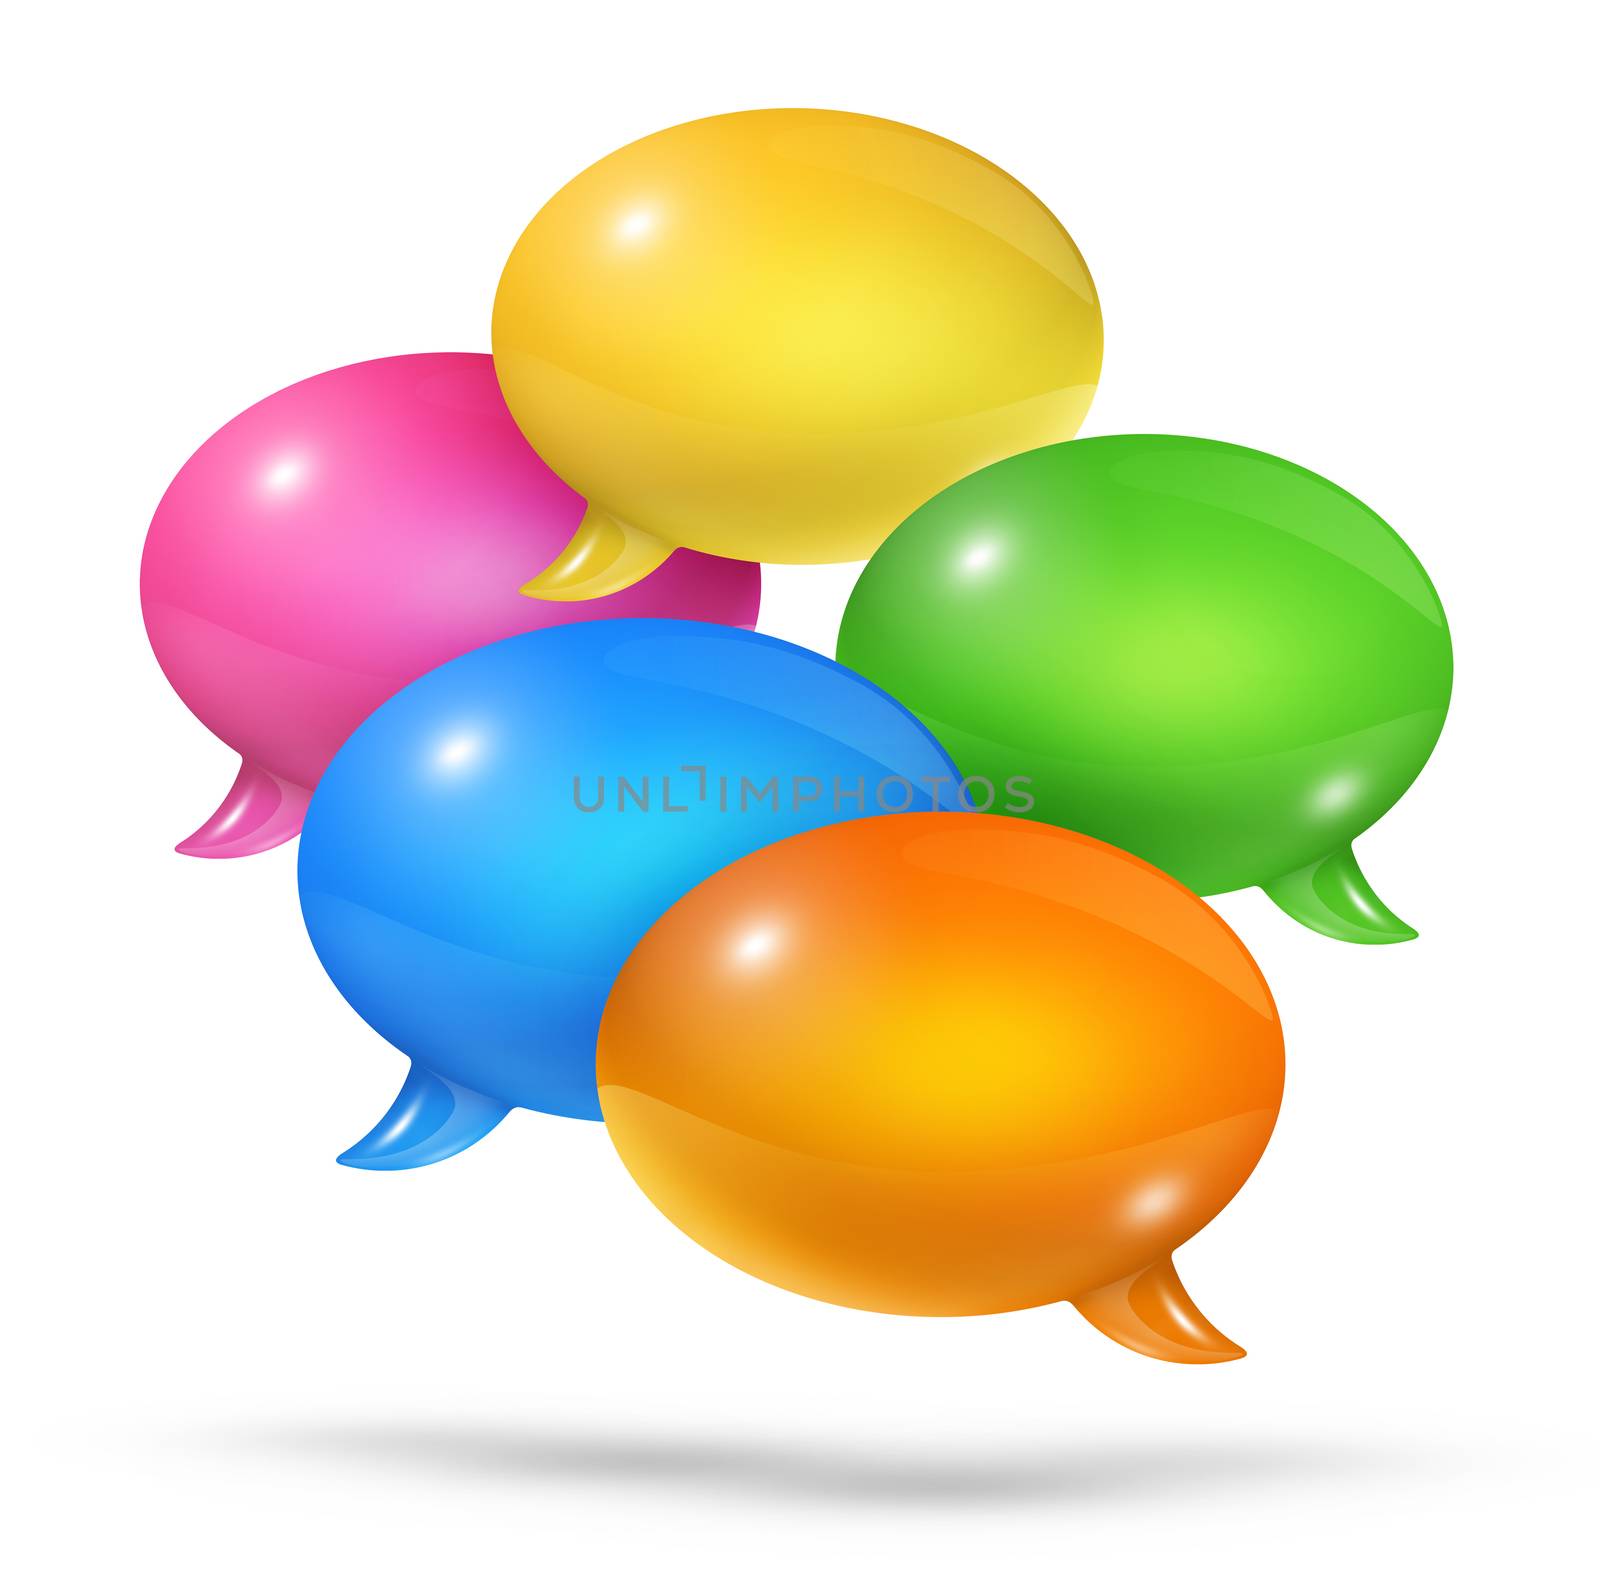 3D group of colored speech bubbles isolated on white